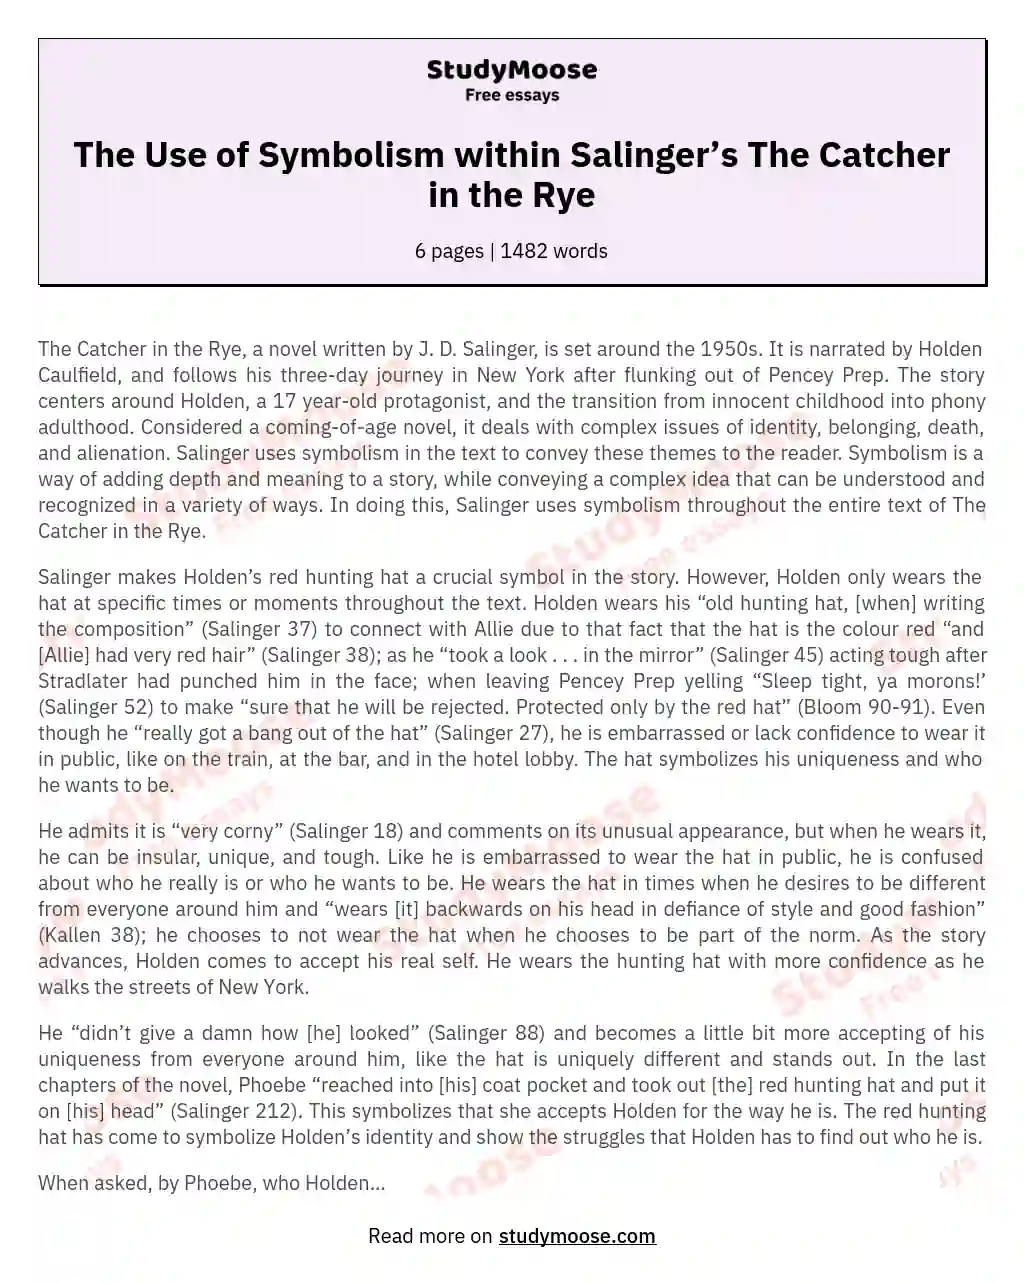 The Use of Symbolism within Salinger’s The Catcher in the Rye essay